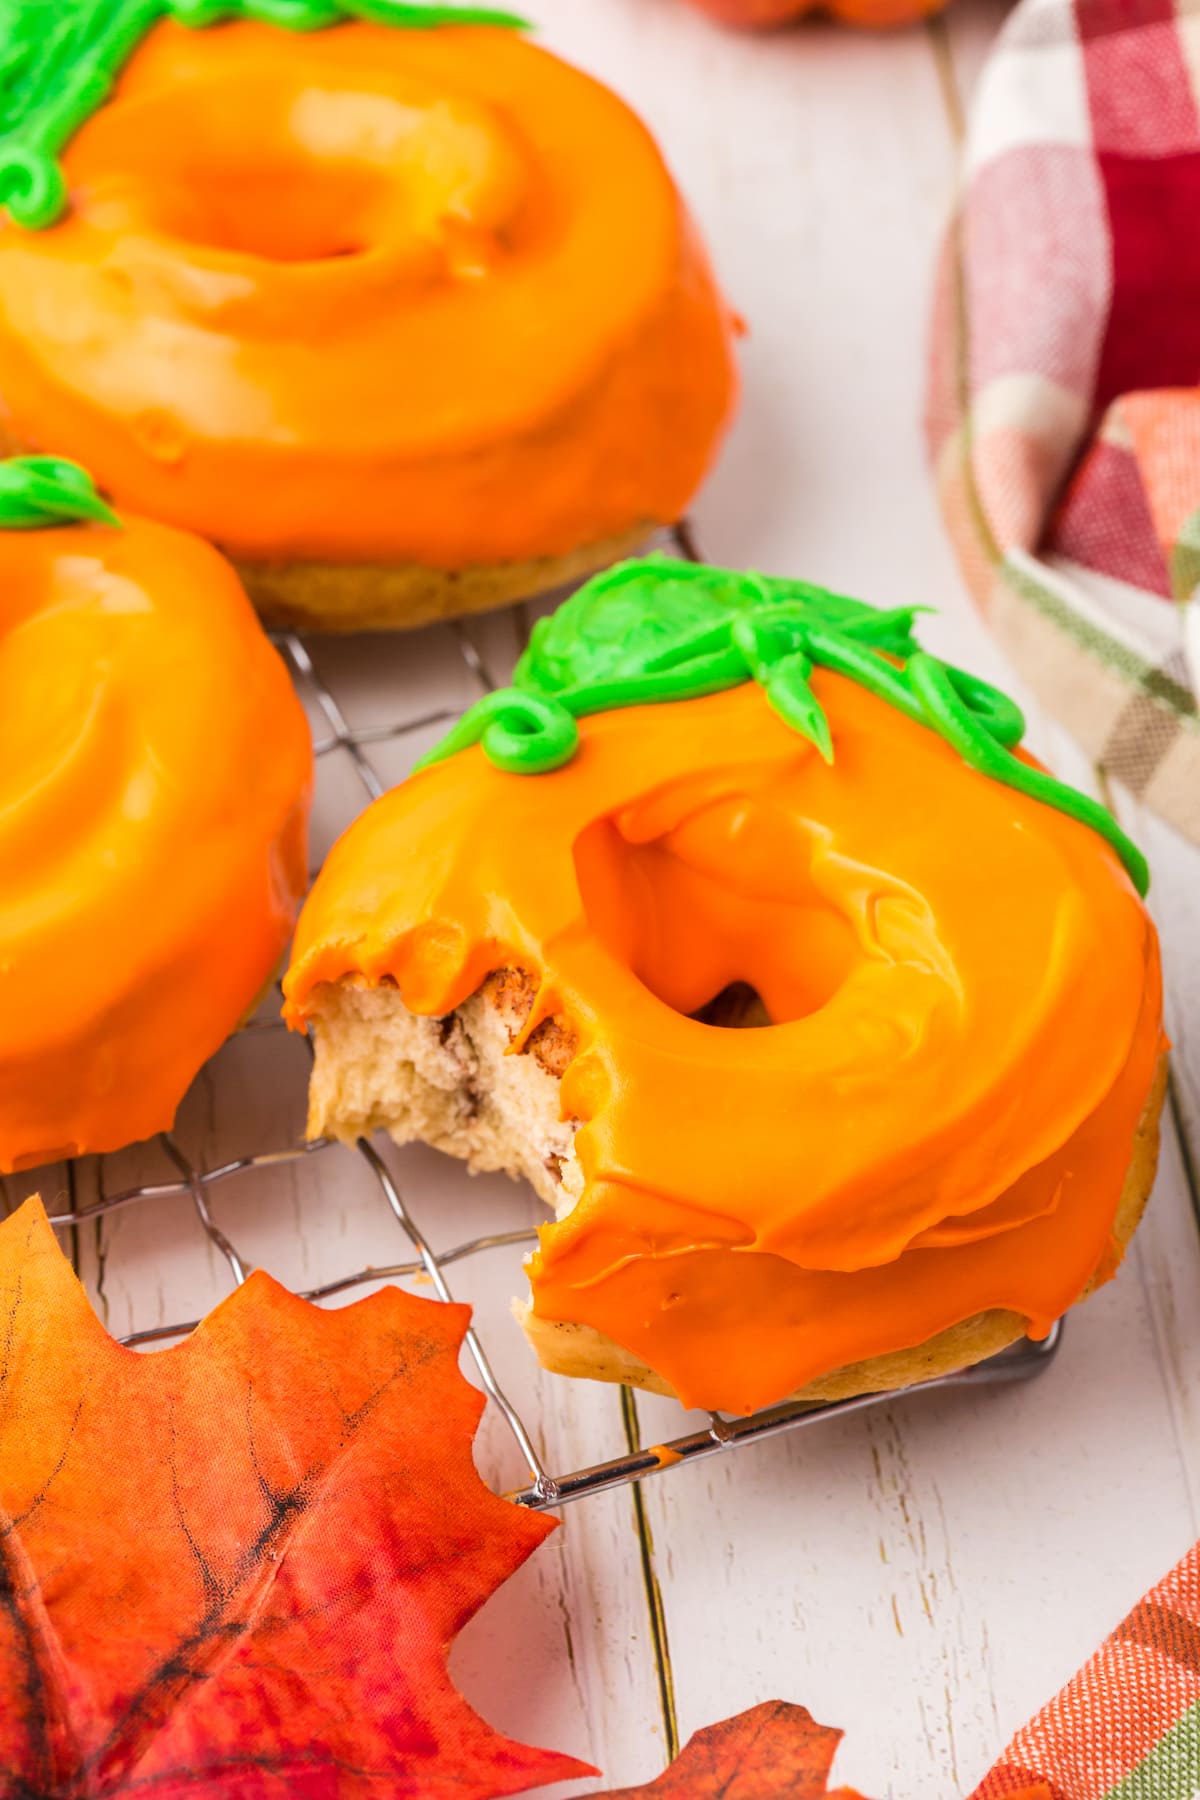 an air fried donut coated in orange and green icing to look like a pumpkin with a bite taken out of it